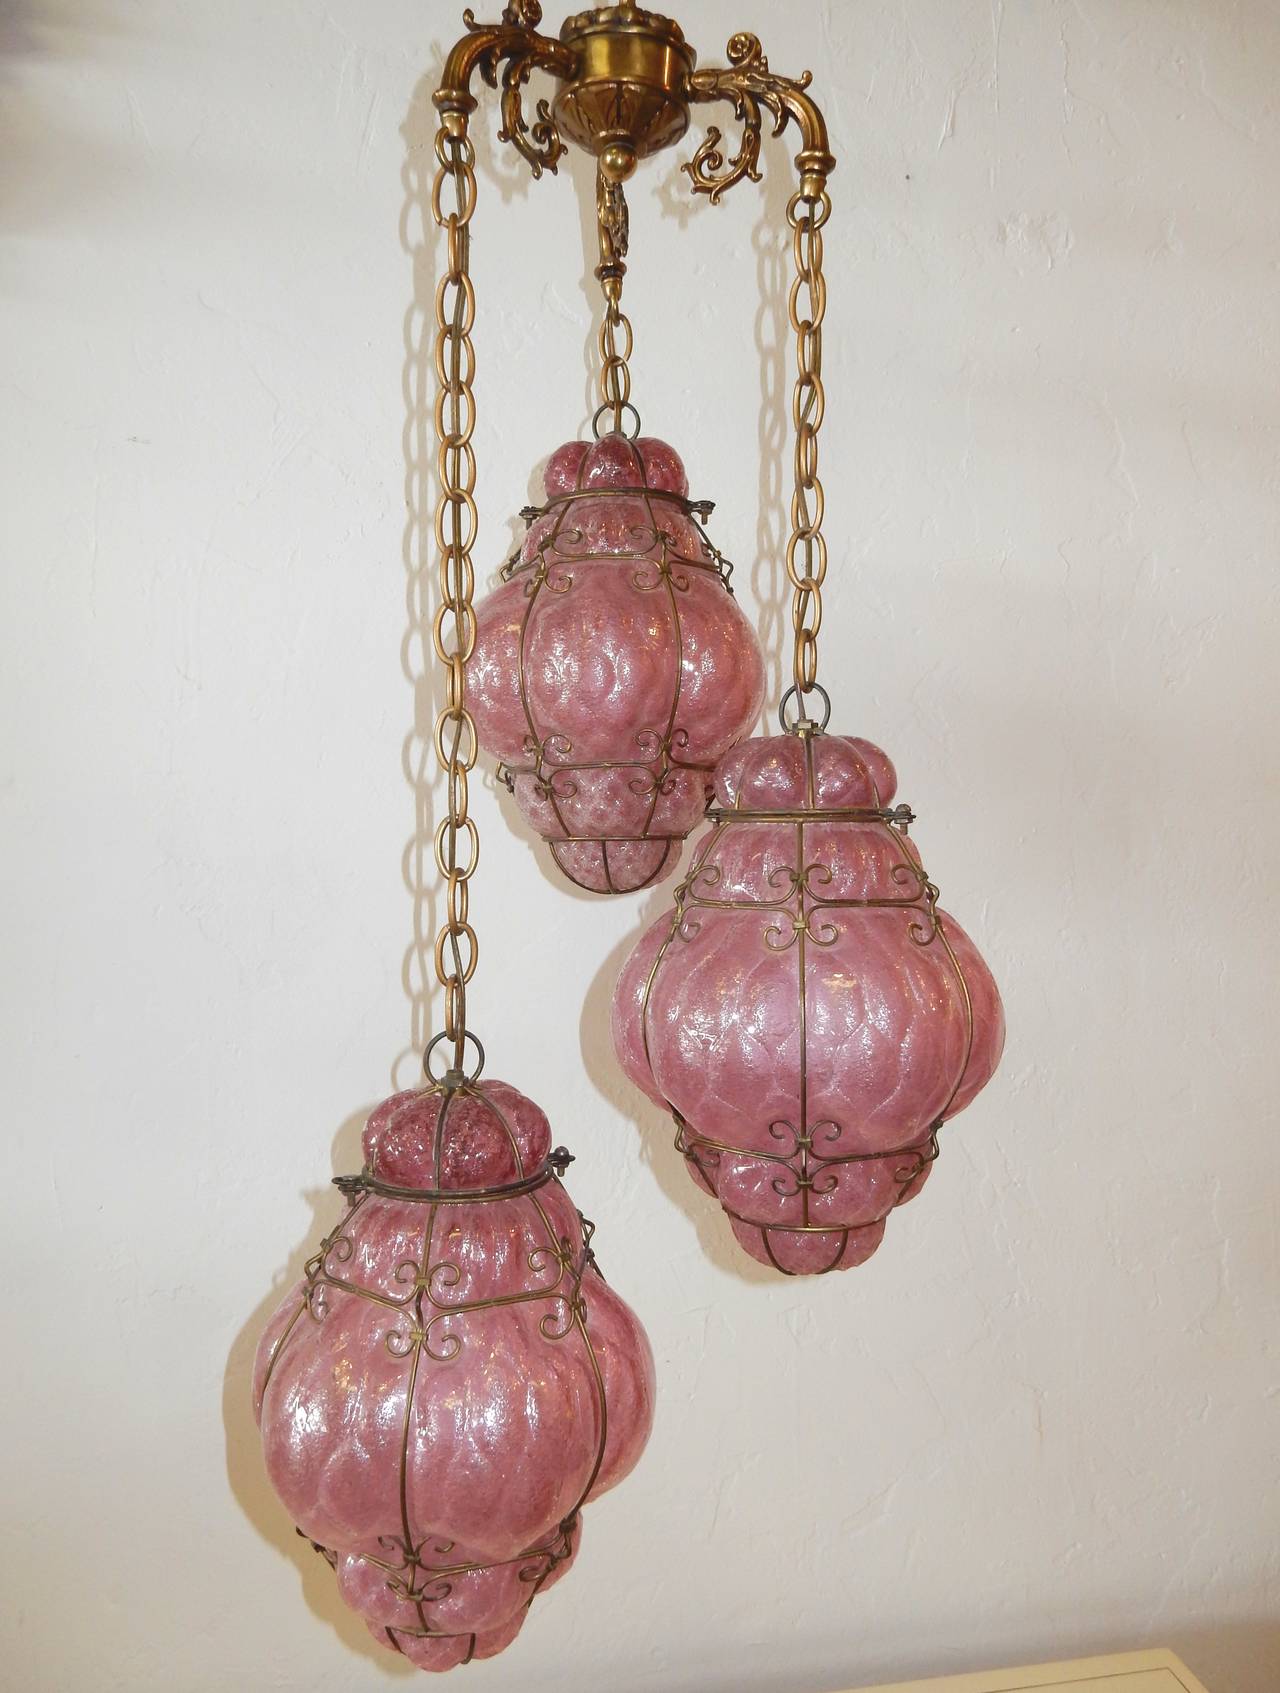 Fabulous triple pendant cage art glass chandelier from Murano Italy circa 1950's
Hand blown translucent PINK glass with brass cage, chain and hardware.